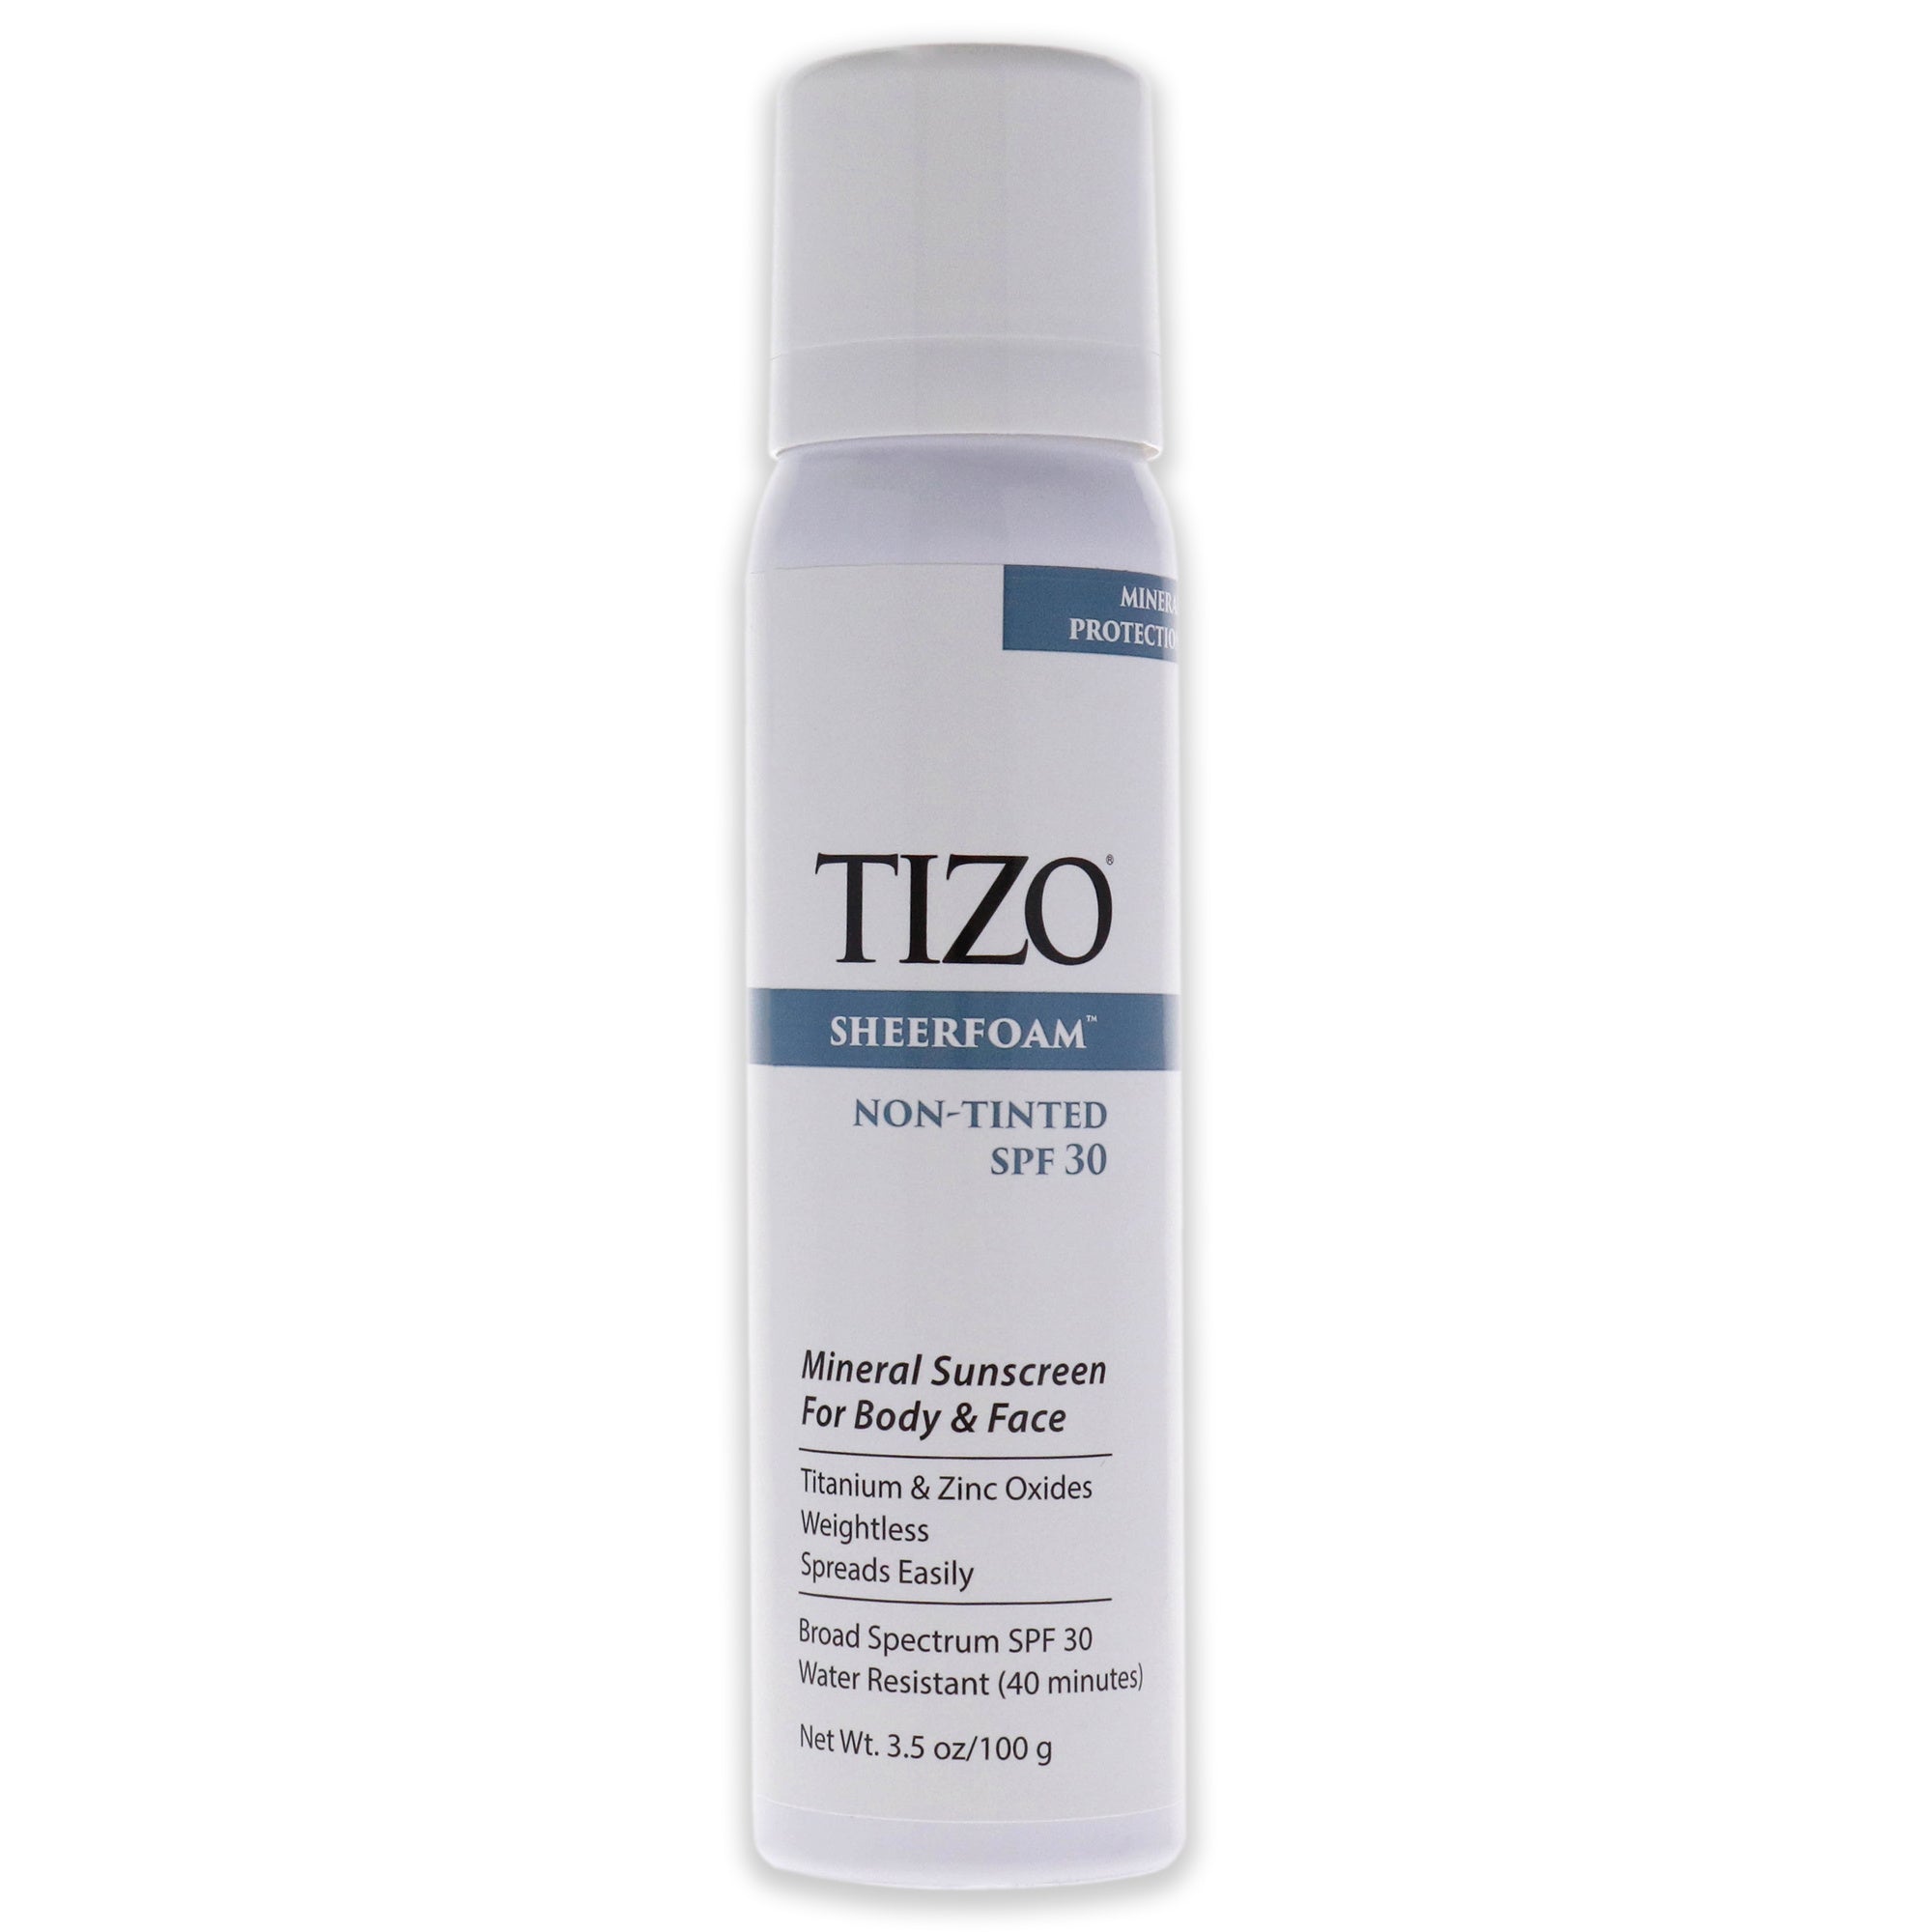 SheerFoam Body And Face Non-Tinted SPF 30 by Tizo for Unisex - 3.5 oz Sunscreen